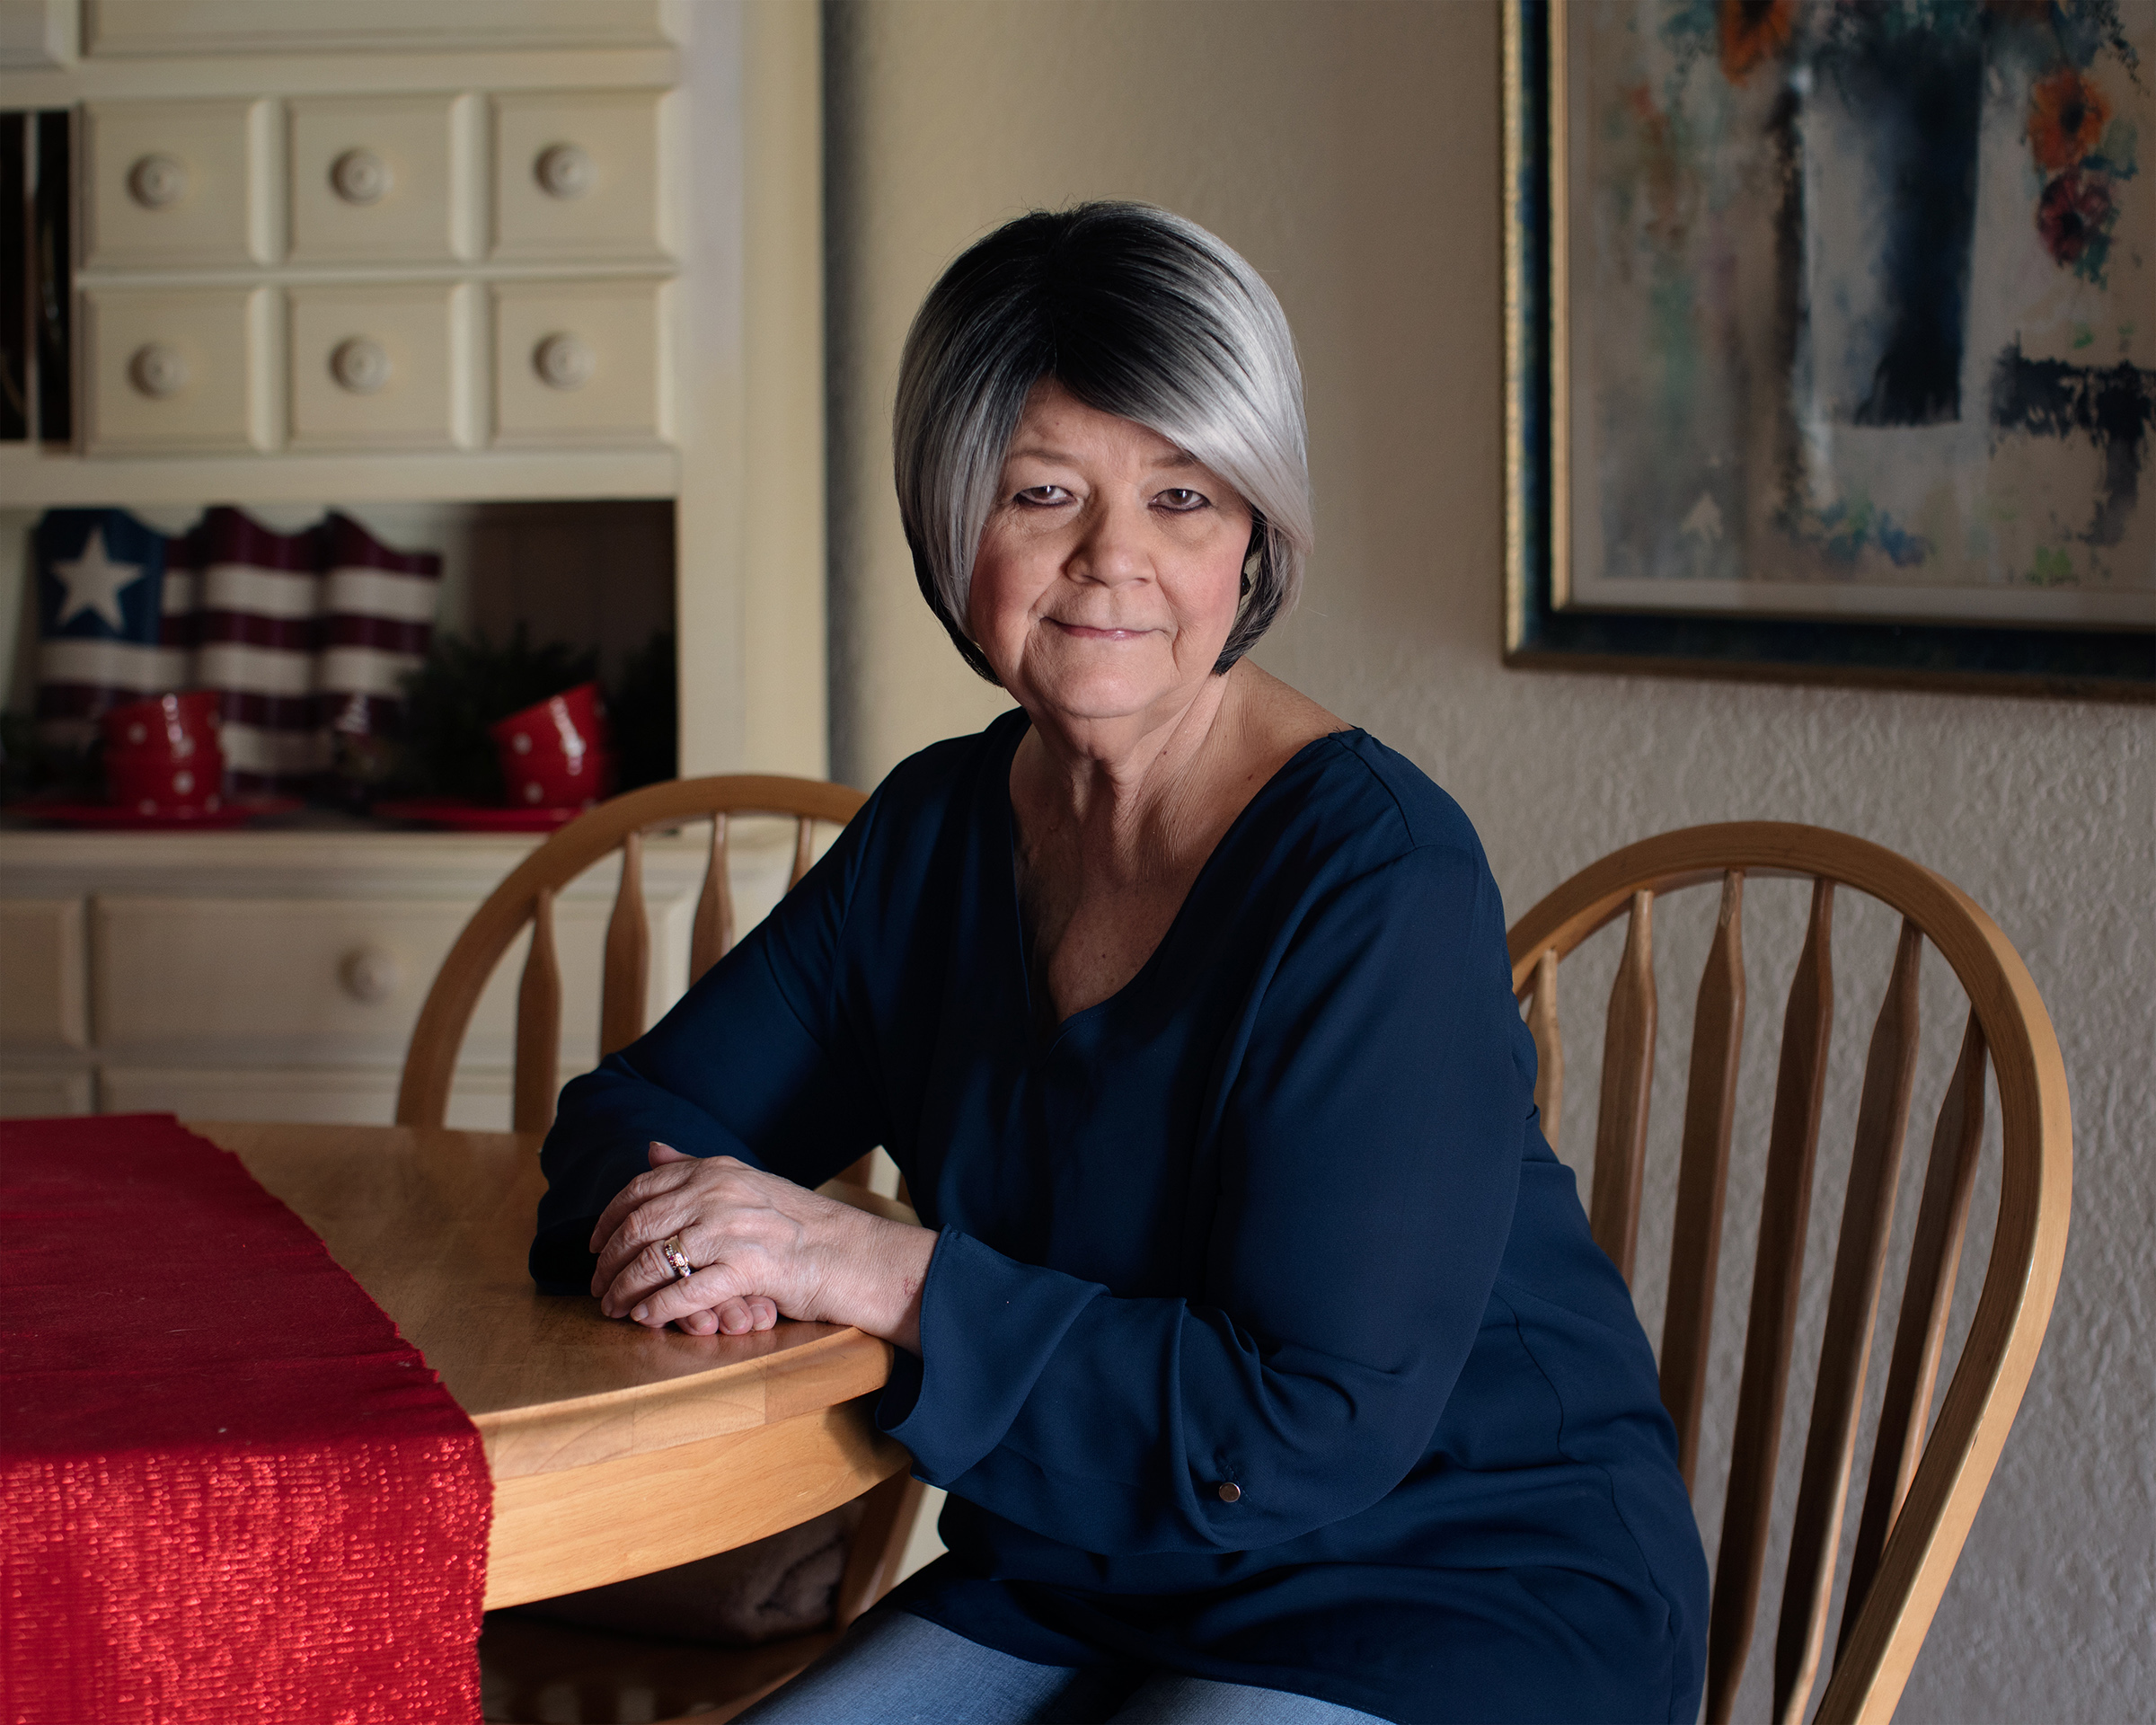 Cathy Ayers in her home in Harlingen, TX on Dec. 6, 2019. (Bryan Schutmaat for TIME)